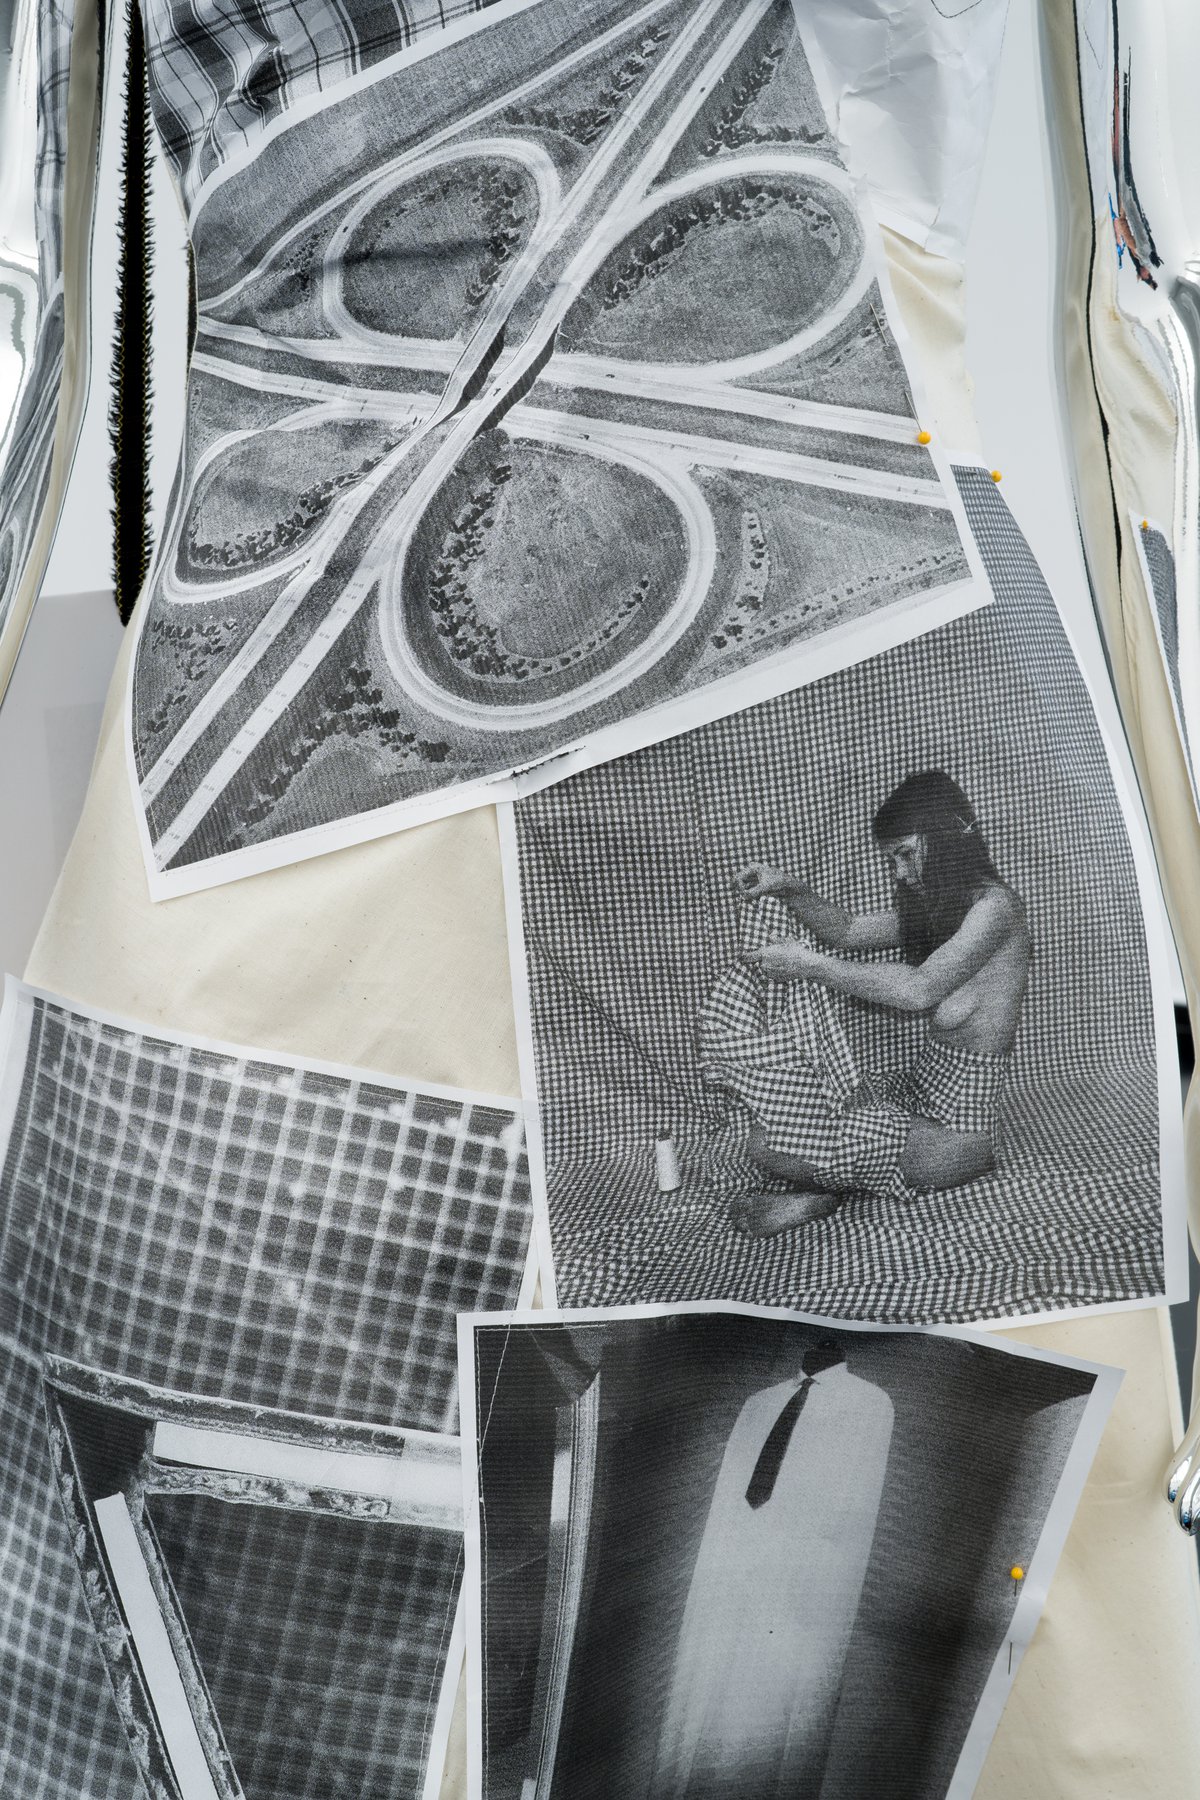 Anna-Sophie Berger and Teak RamosSomething for Everyone, Everything for No One, 2021Ten looks composed of black and white laser prints on A4 paper, polyester, tailoring cotton, organza, suit fabrics, zippers, thread, chrome mannequins, Detail viewYou can have my brain, MACRO, Rome, 2021